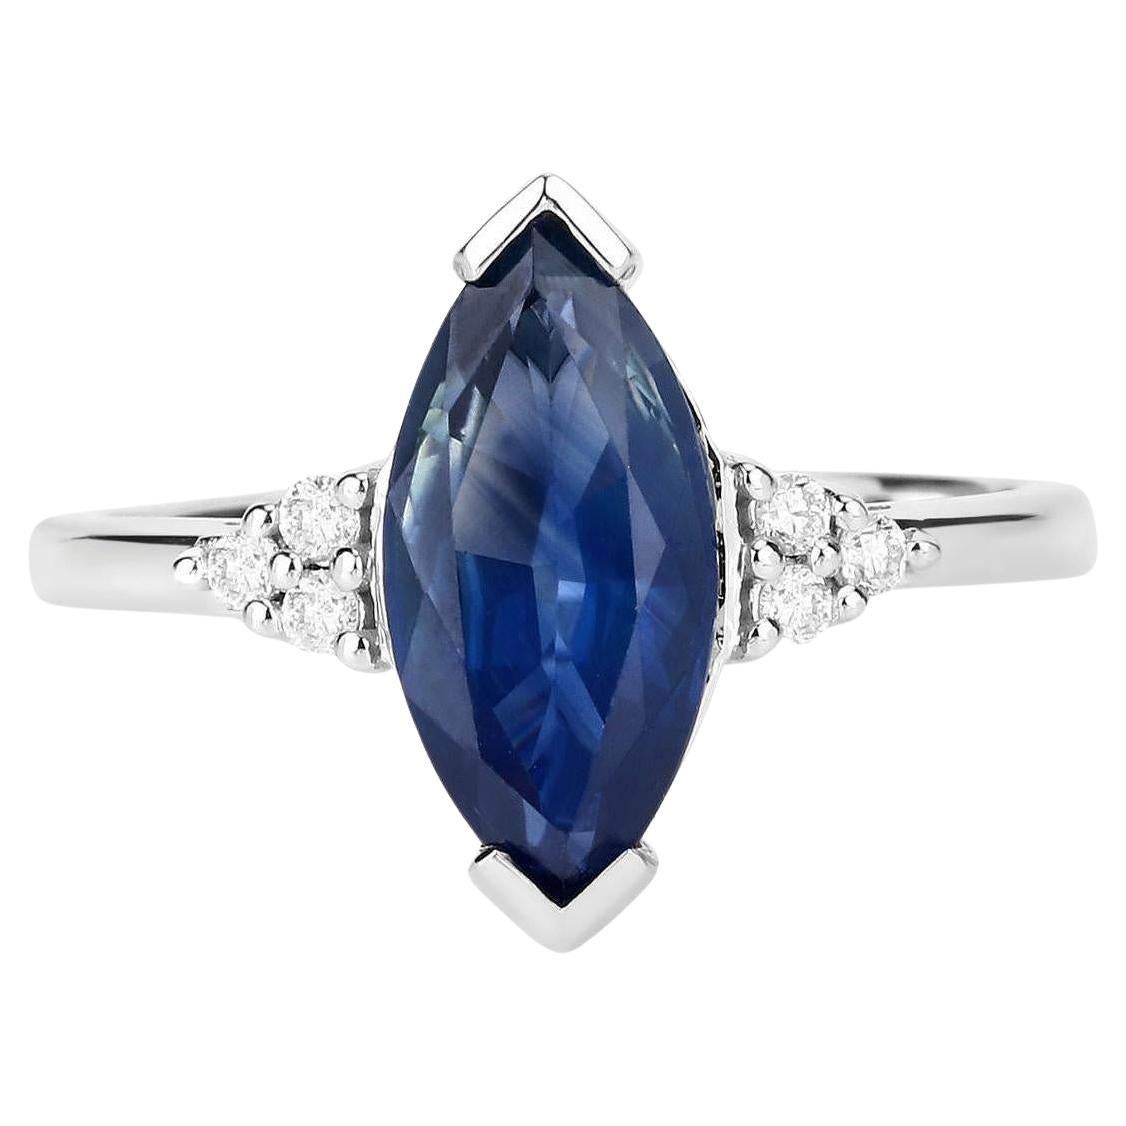 Natural Marquise 4.70 Carat Blue Sapphire and Diamond Ring 14K White Gold